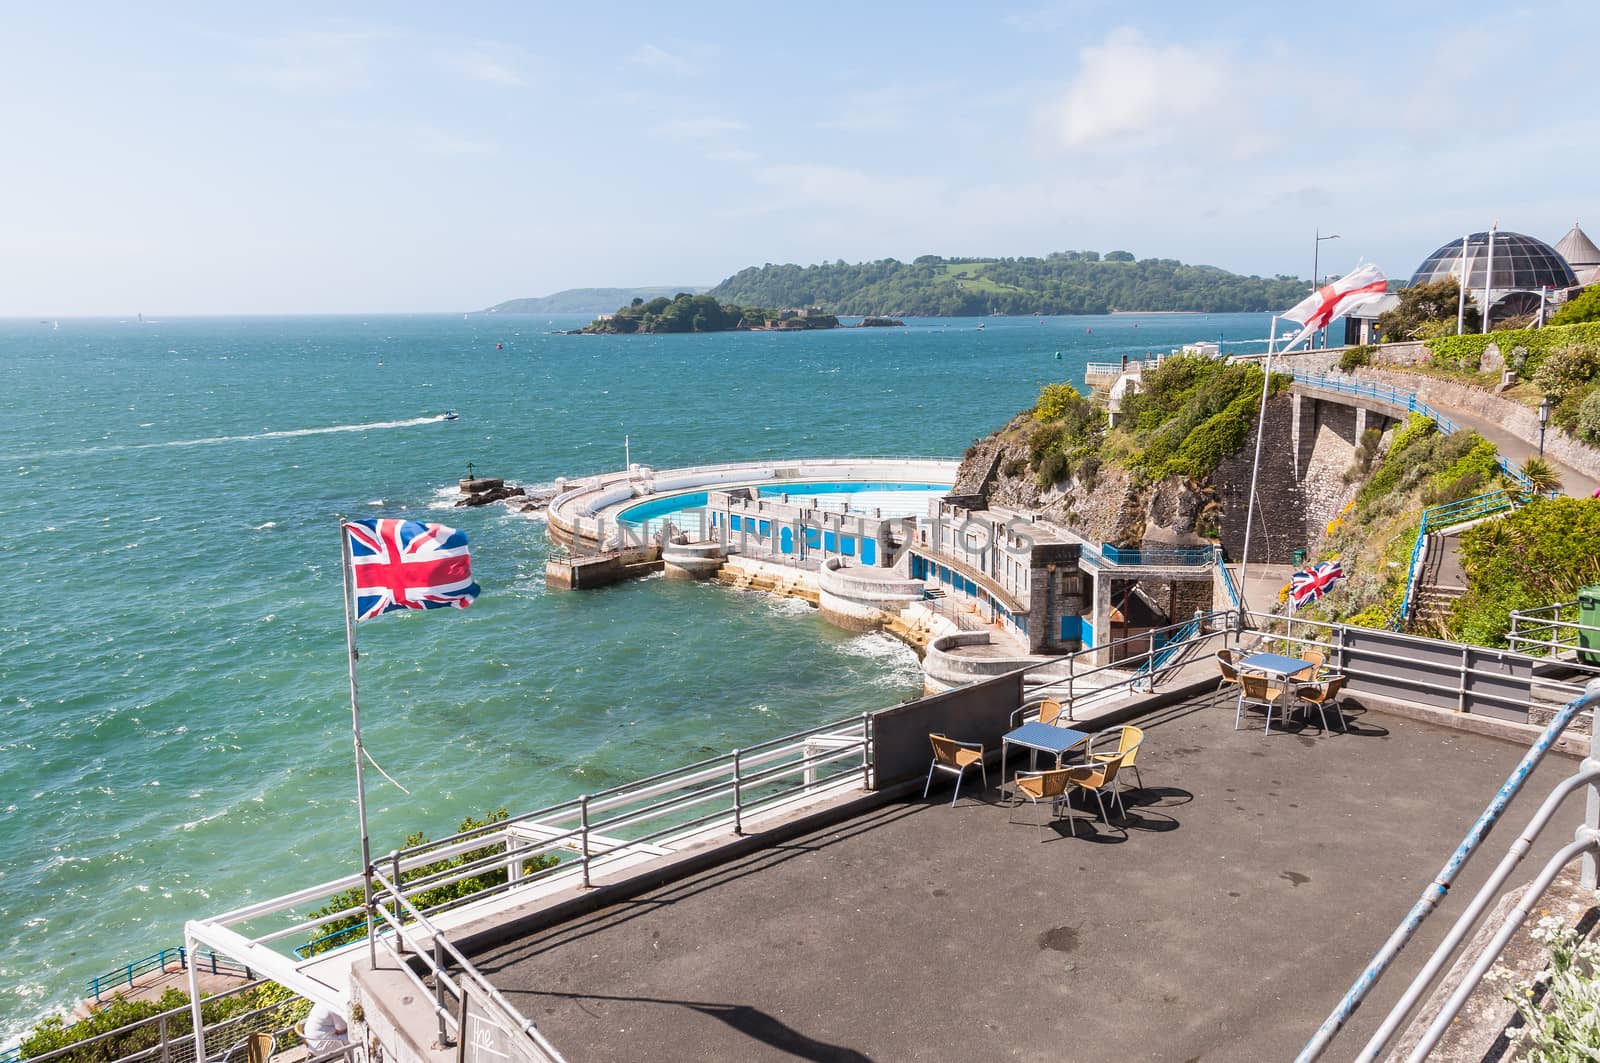 View of Drakes Island from terrace in Plymouth, Great Britain